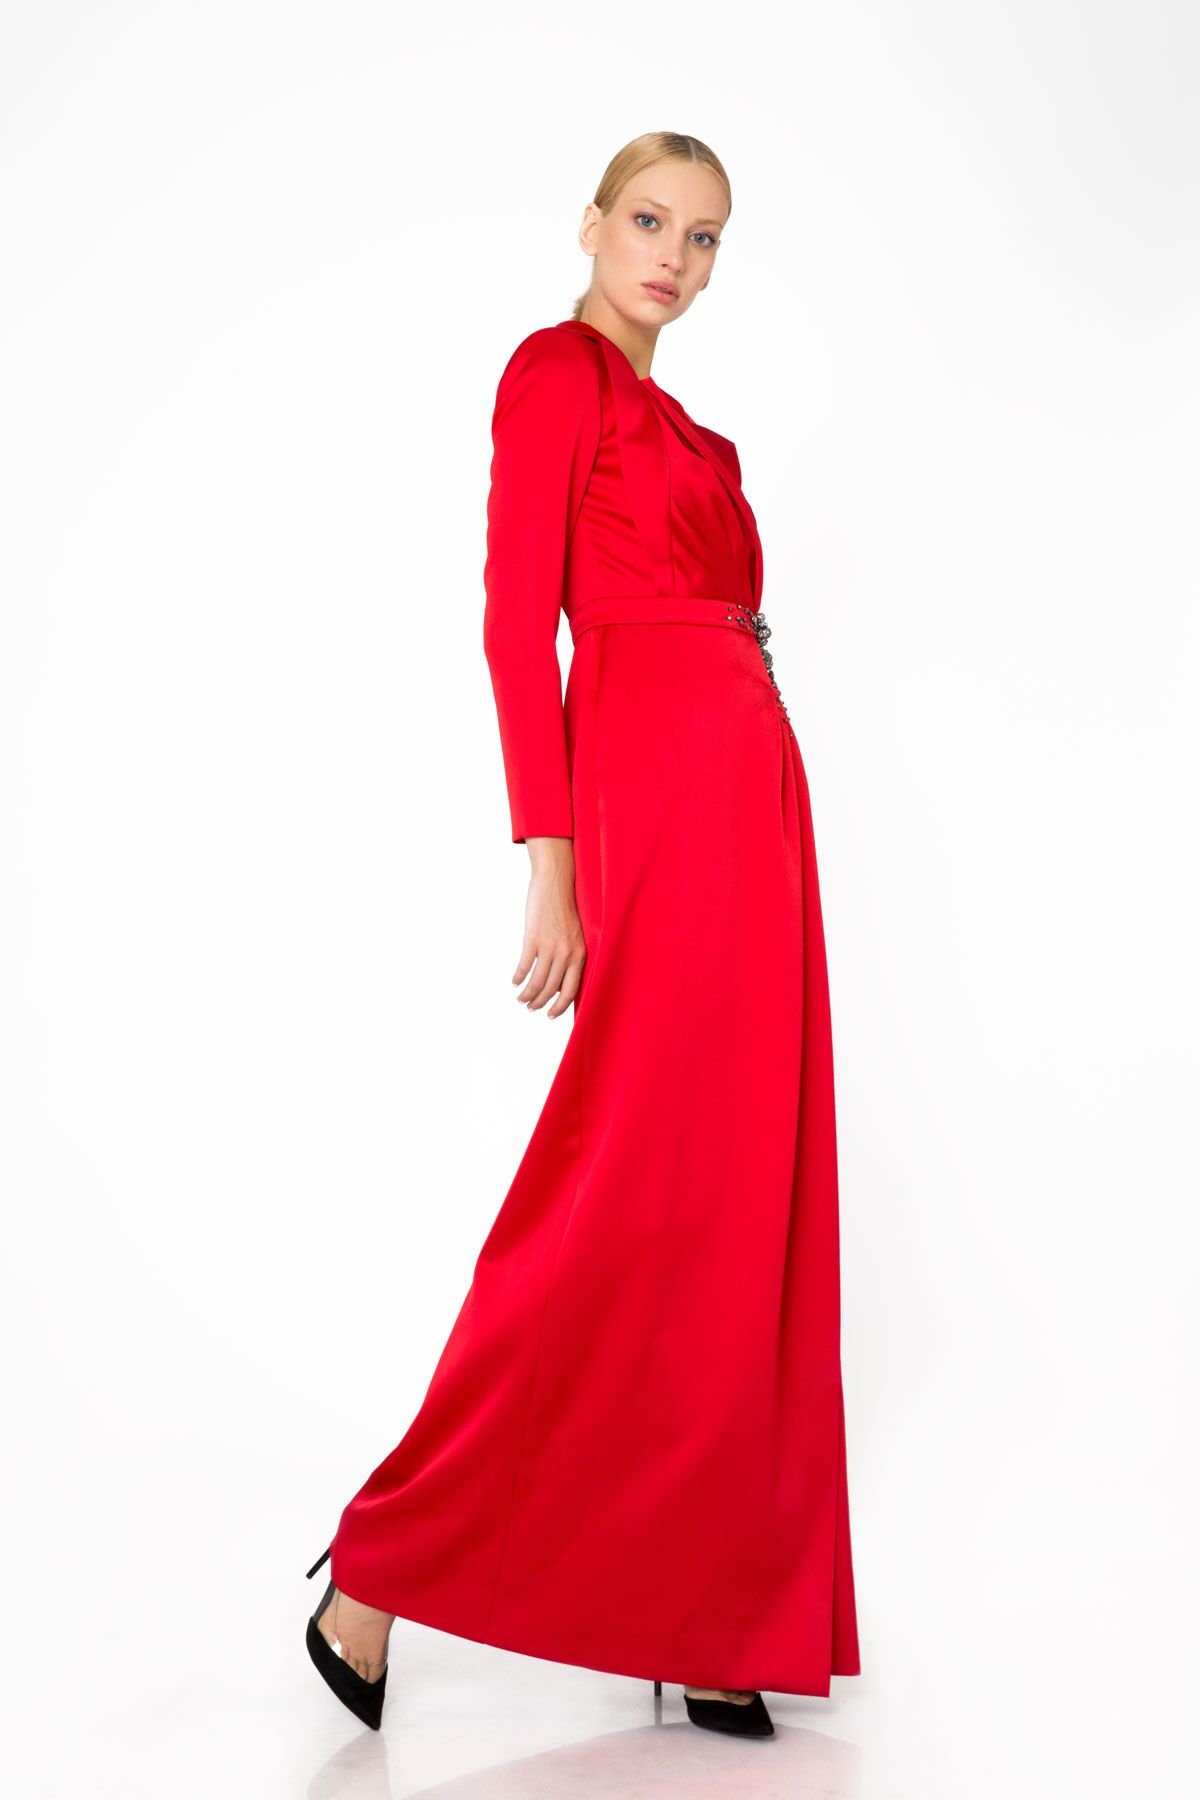 Stone Embroidered Detailed Red Long Evening Dress